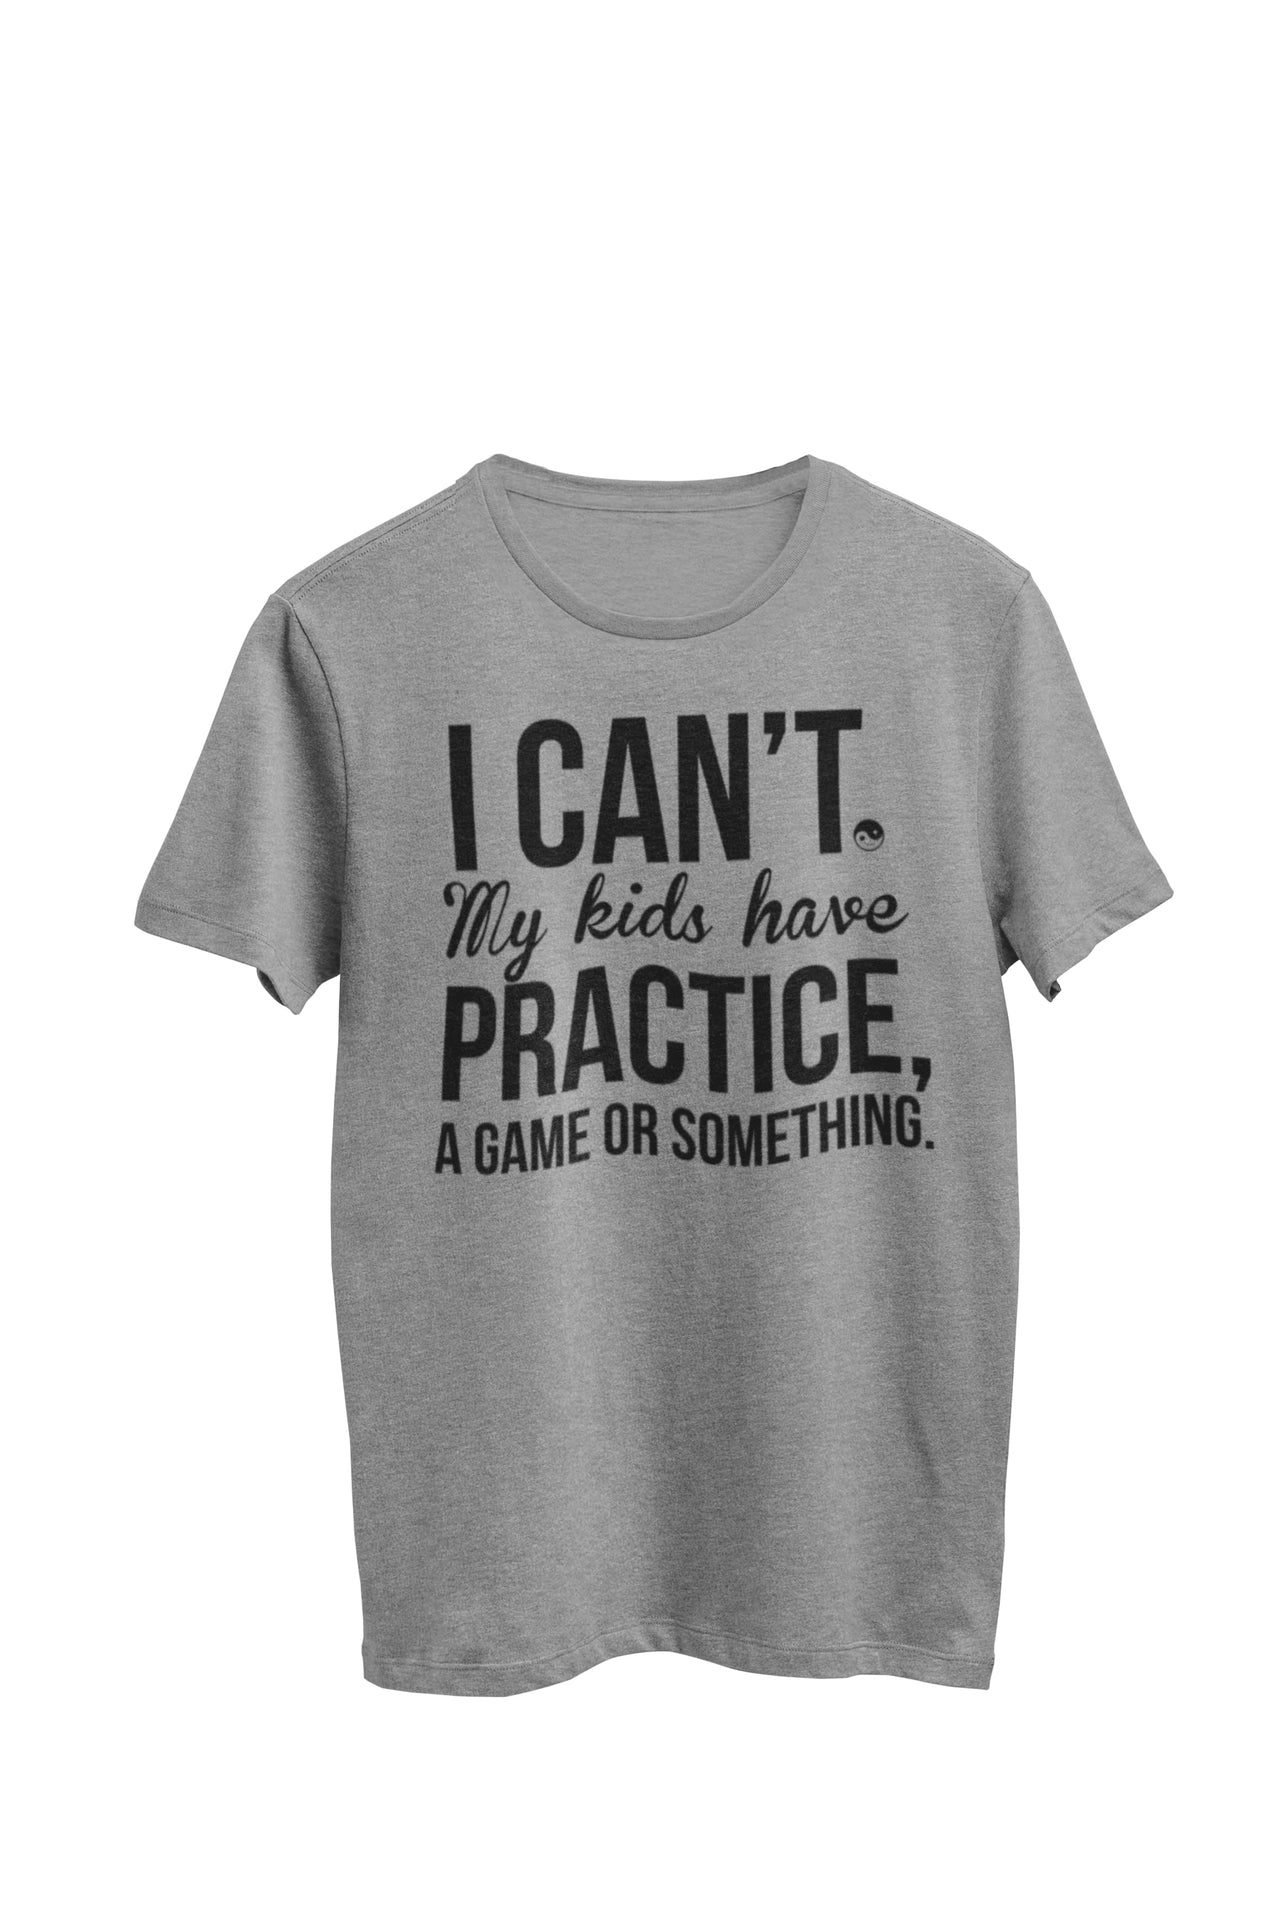 Gray heather unisex t-shirt featuring the text 'I can't, my kids have practice, a game, or something'. Designed by WooHoo Apparel.